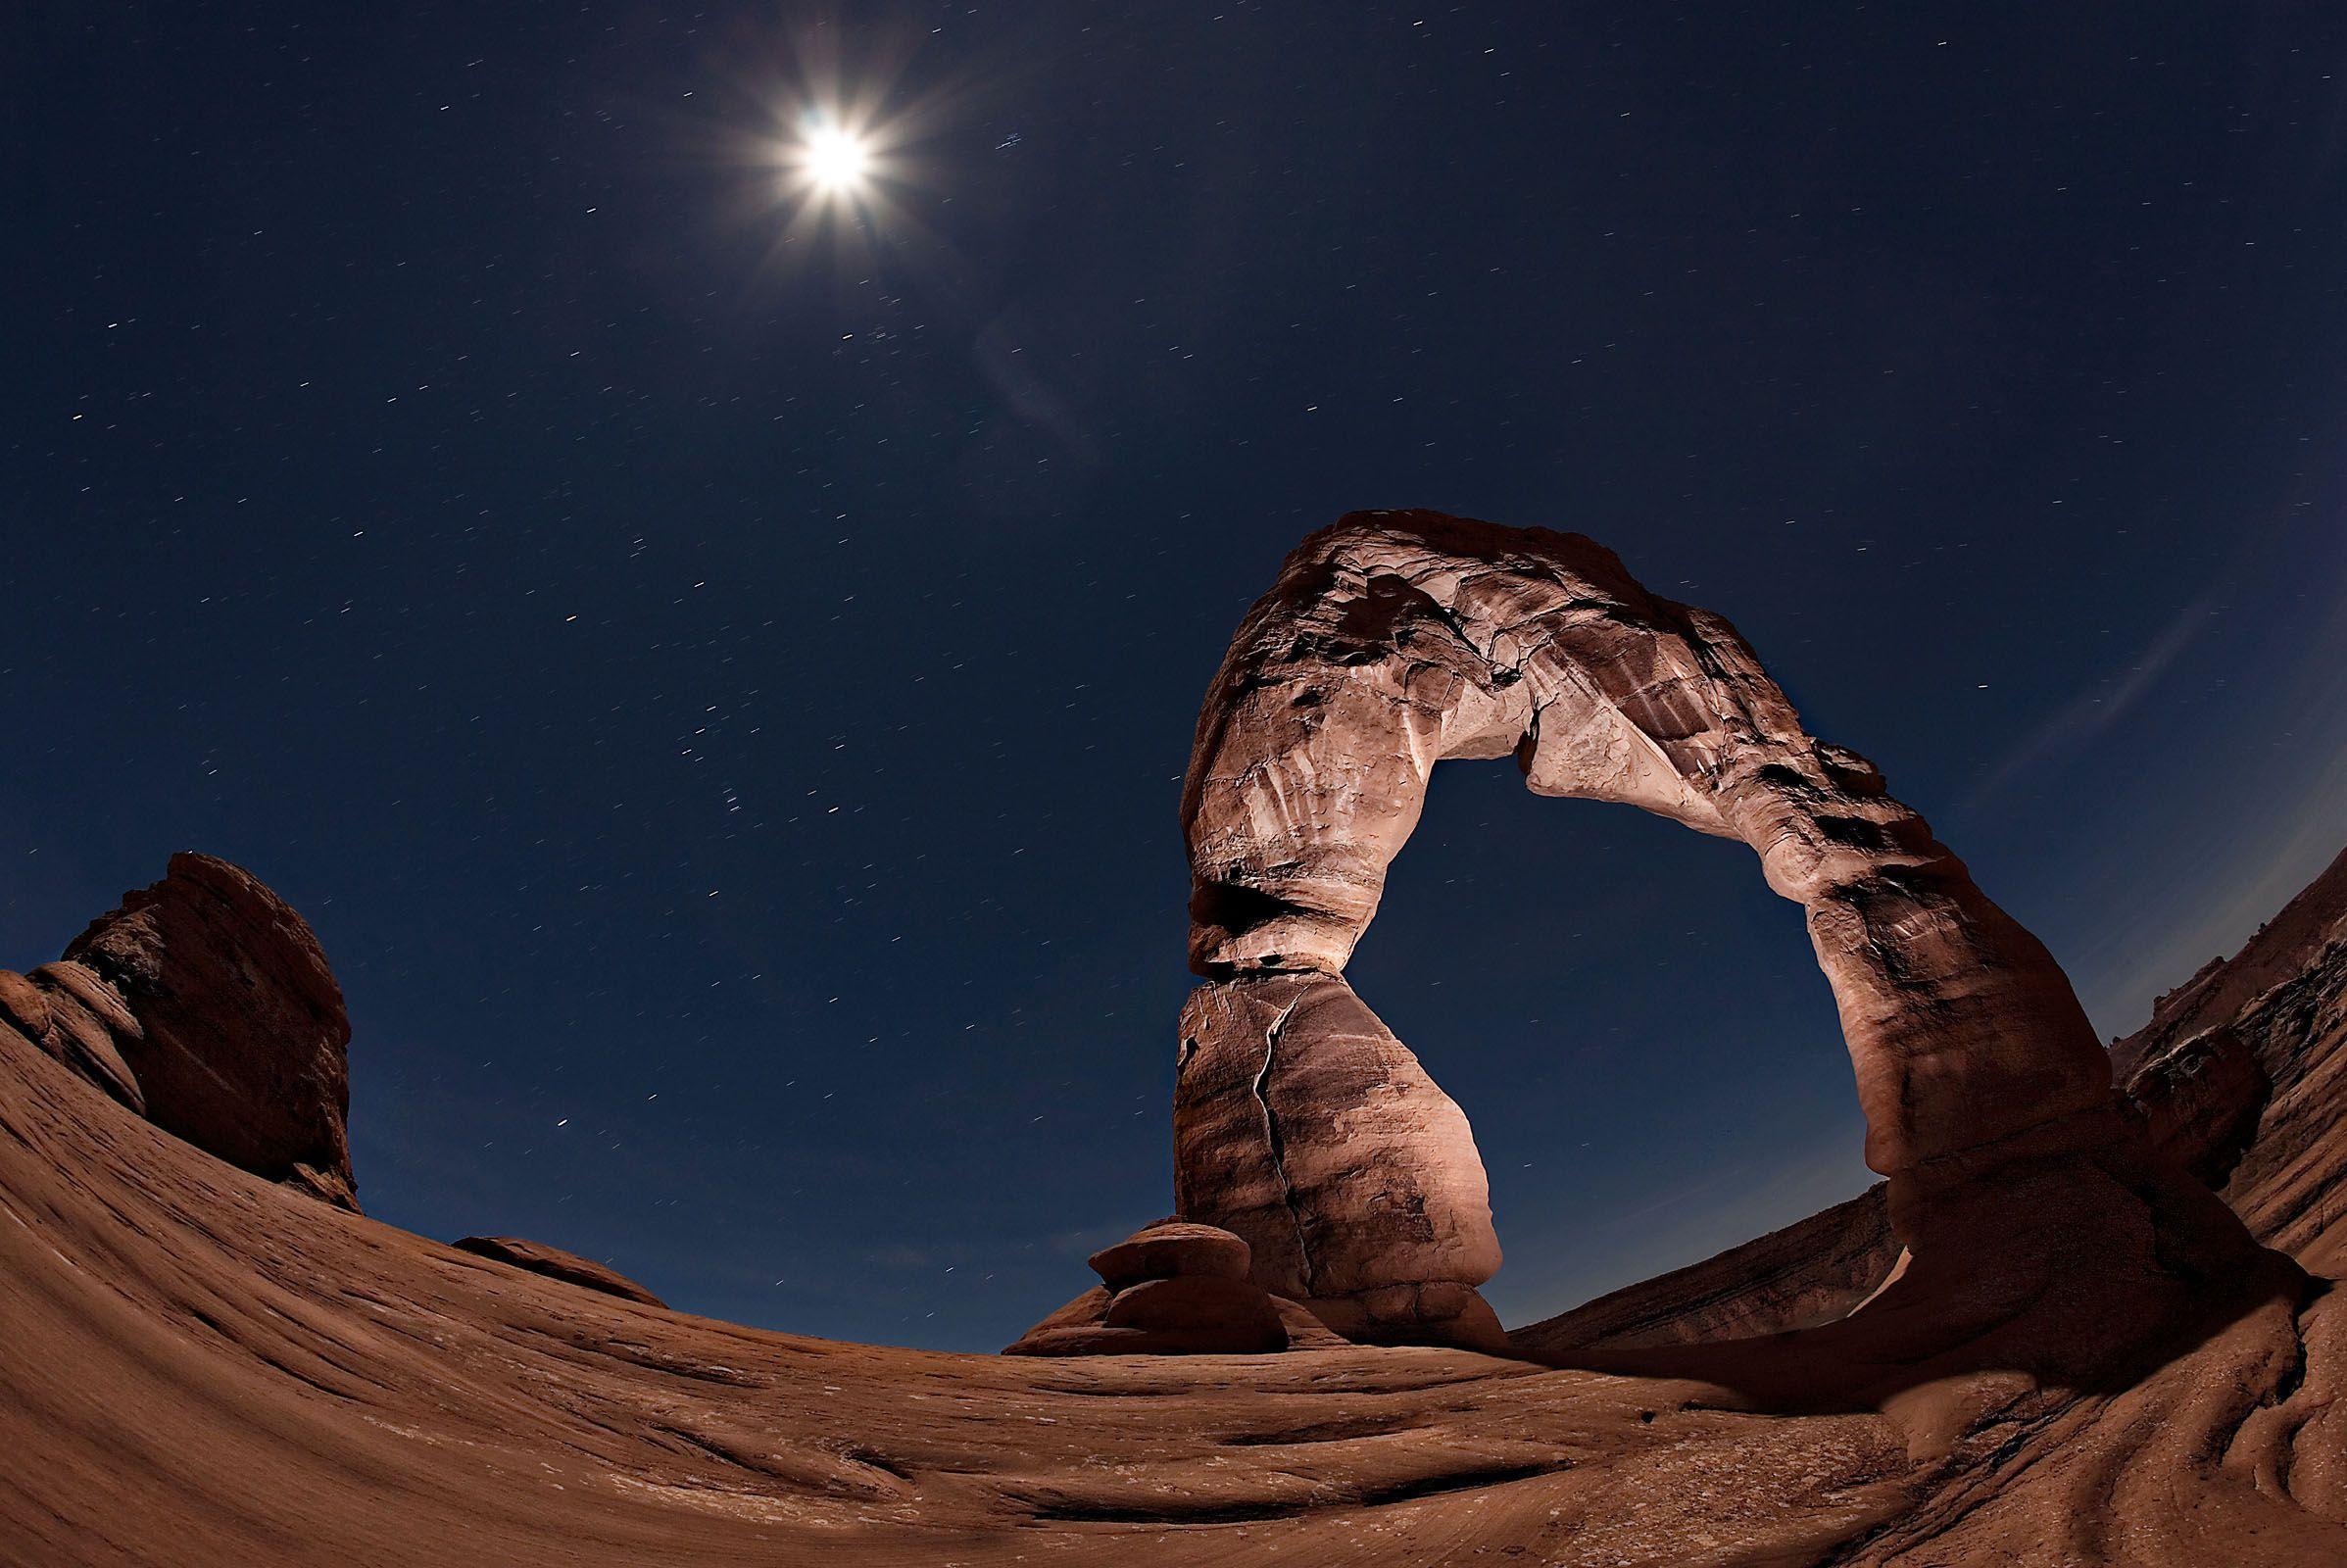 Arches National Park Utah (1) Us Travel photo and wallpaper